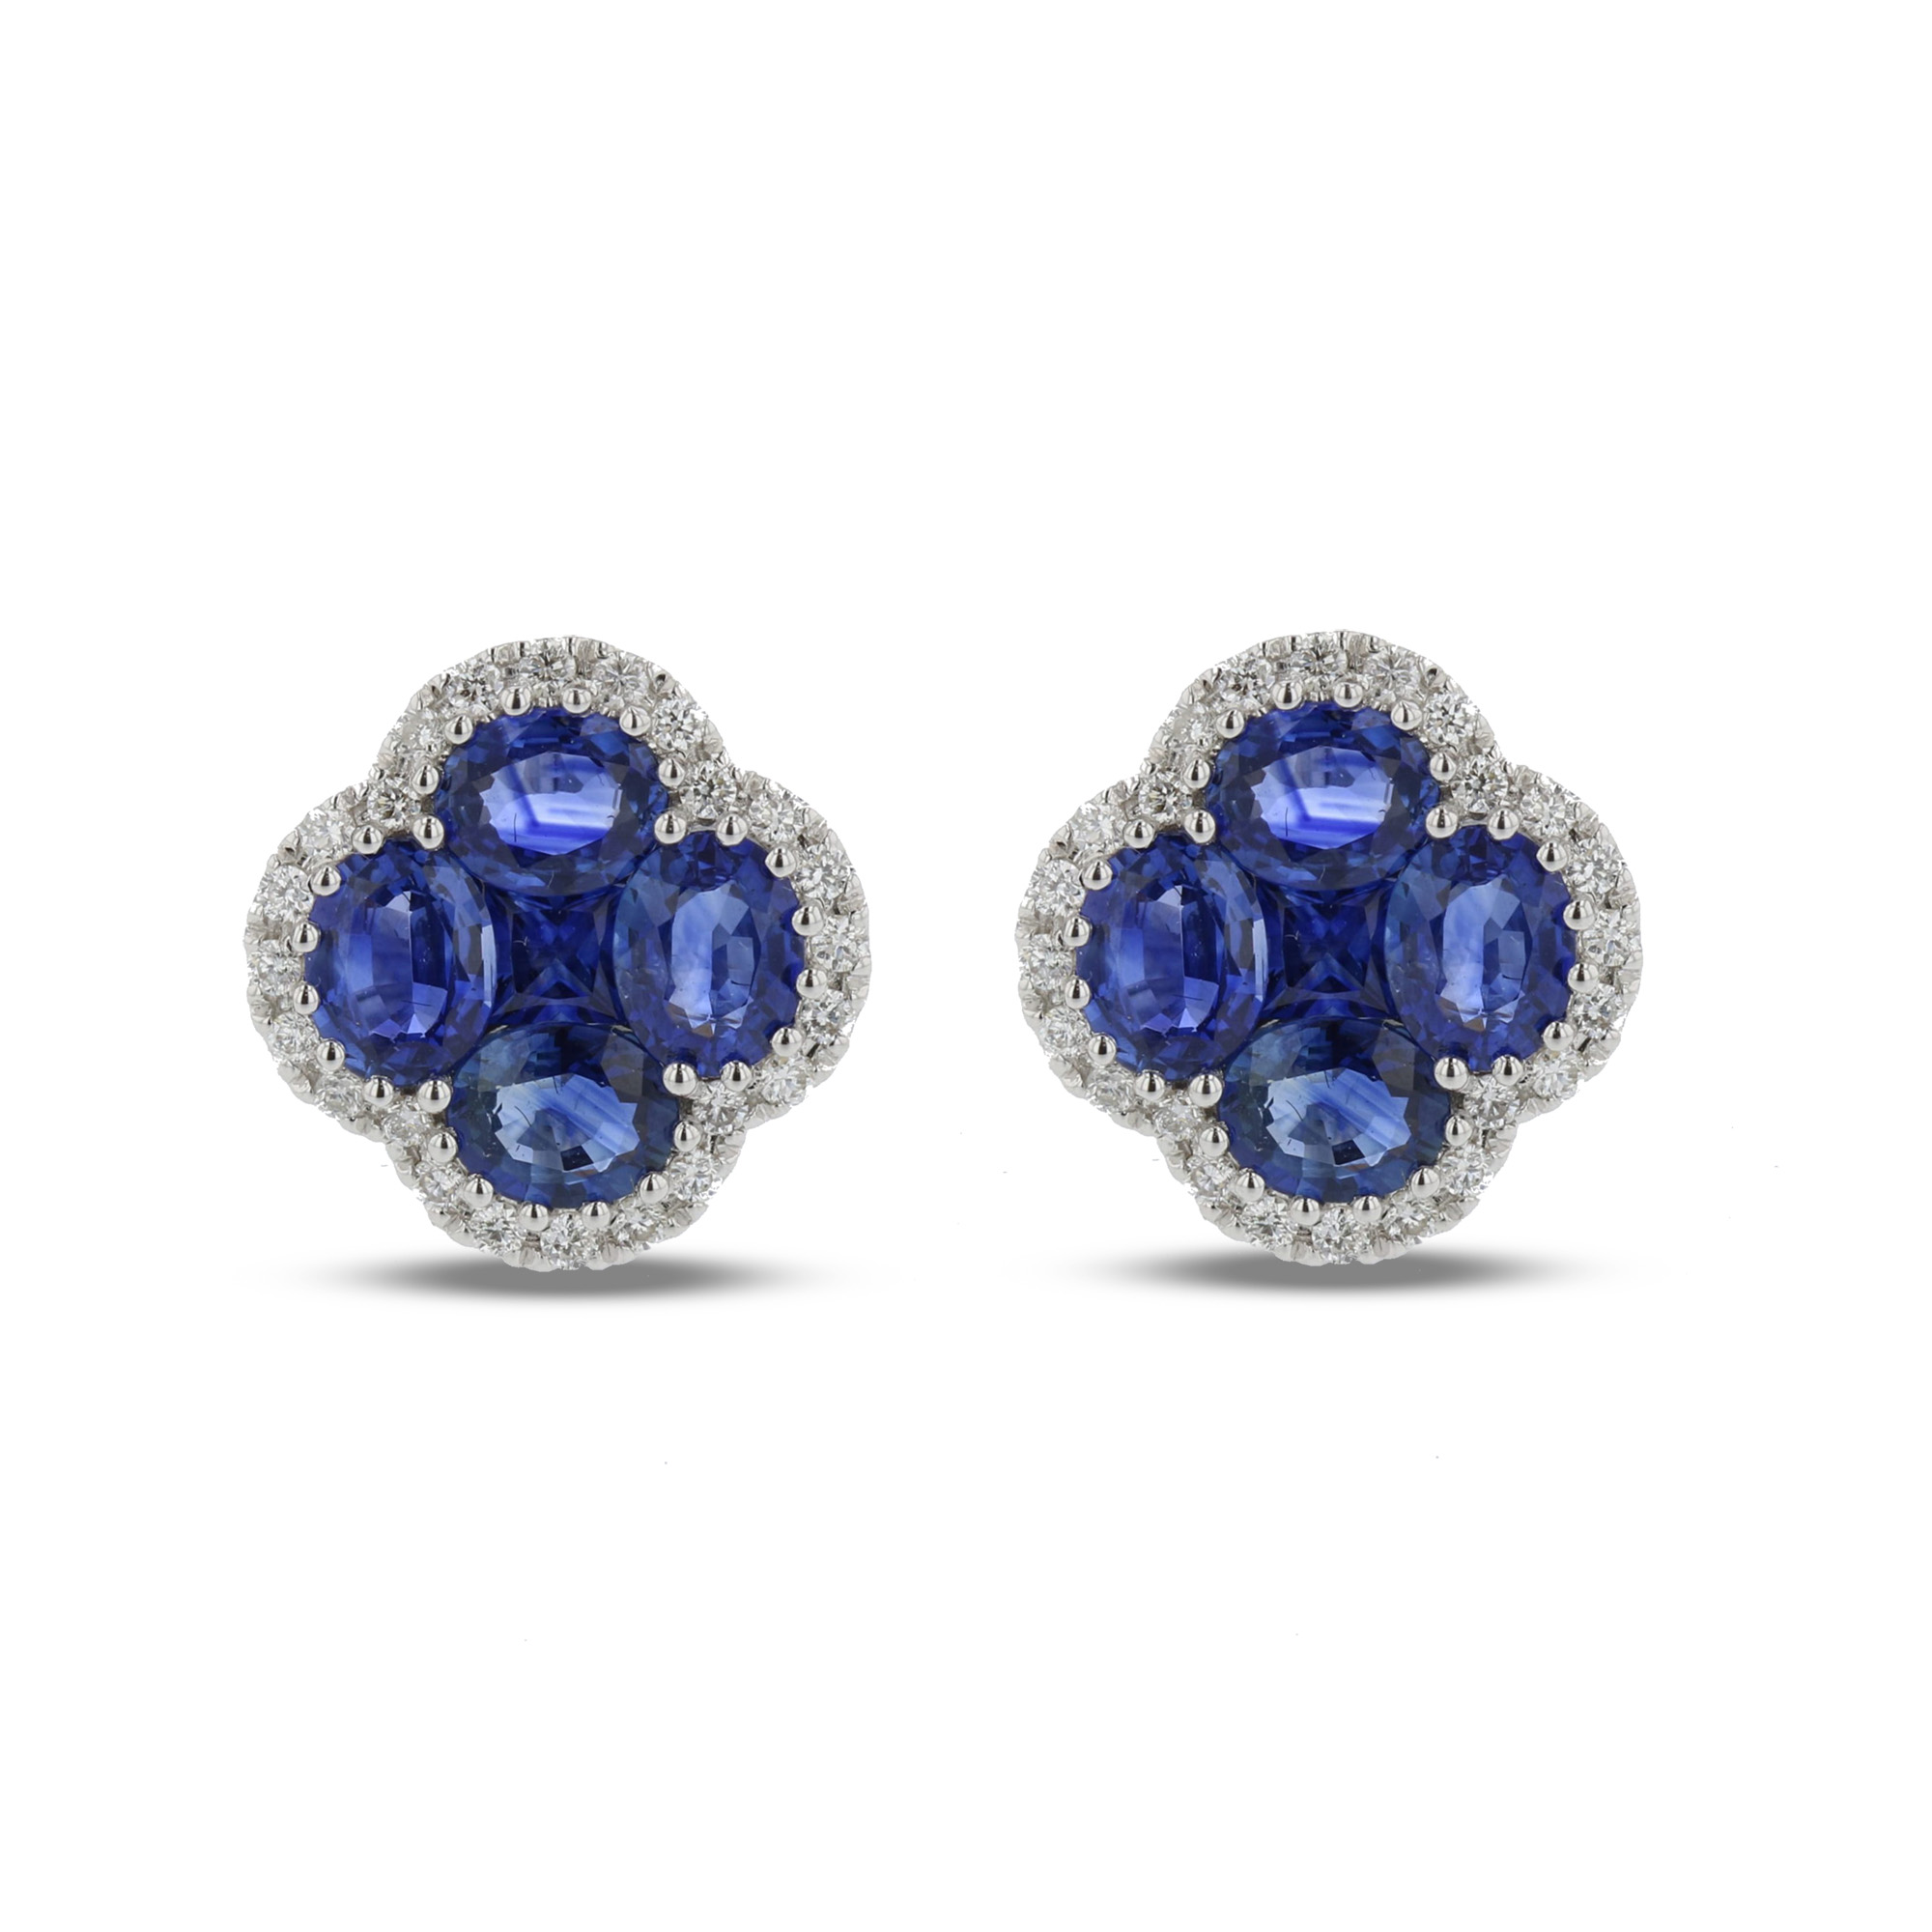 View 0.23ctw Diamond and Sapphire Clover Earring in 18k White Gold